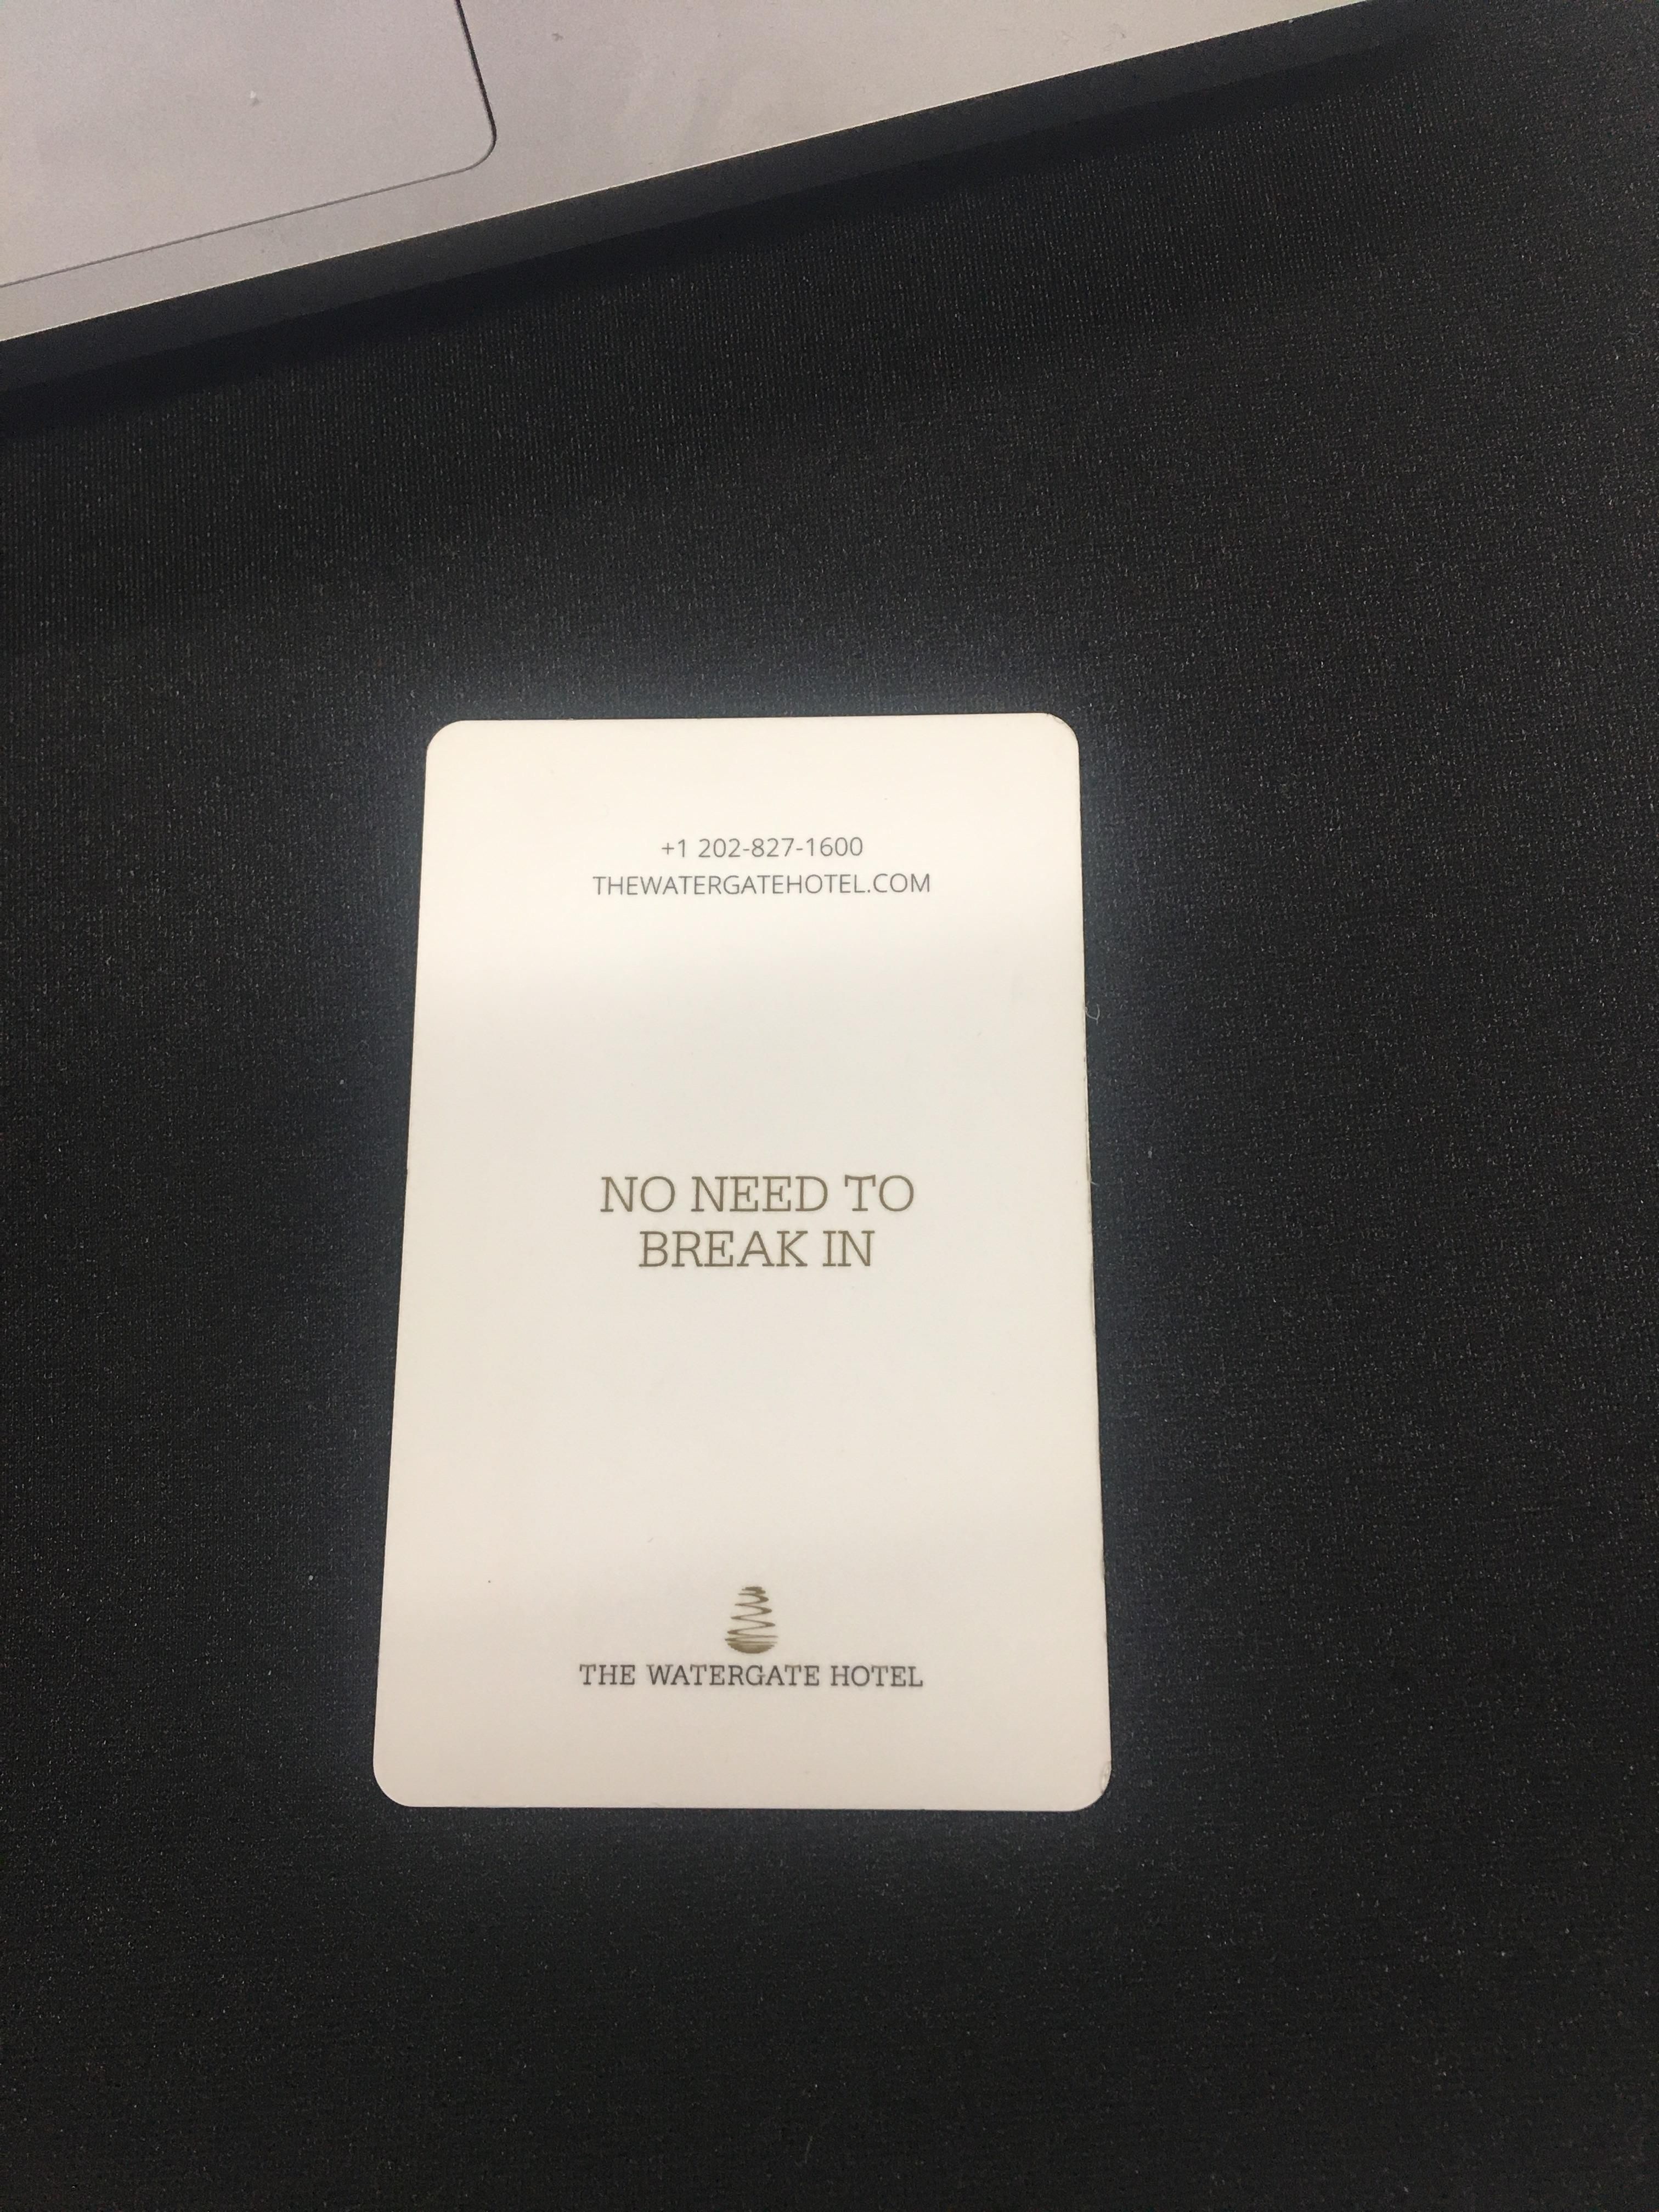 The key card they give you at the Watergate Hotel